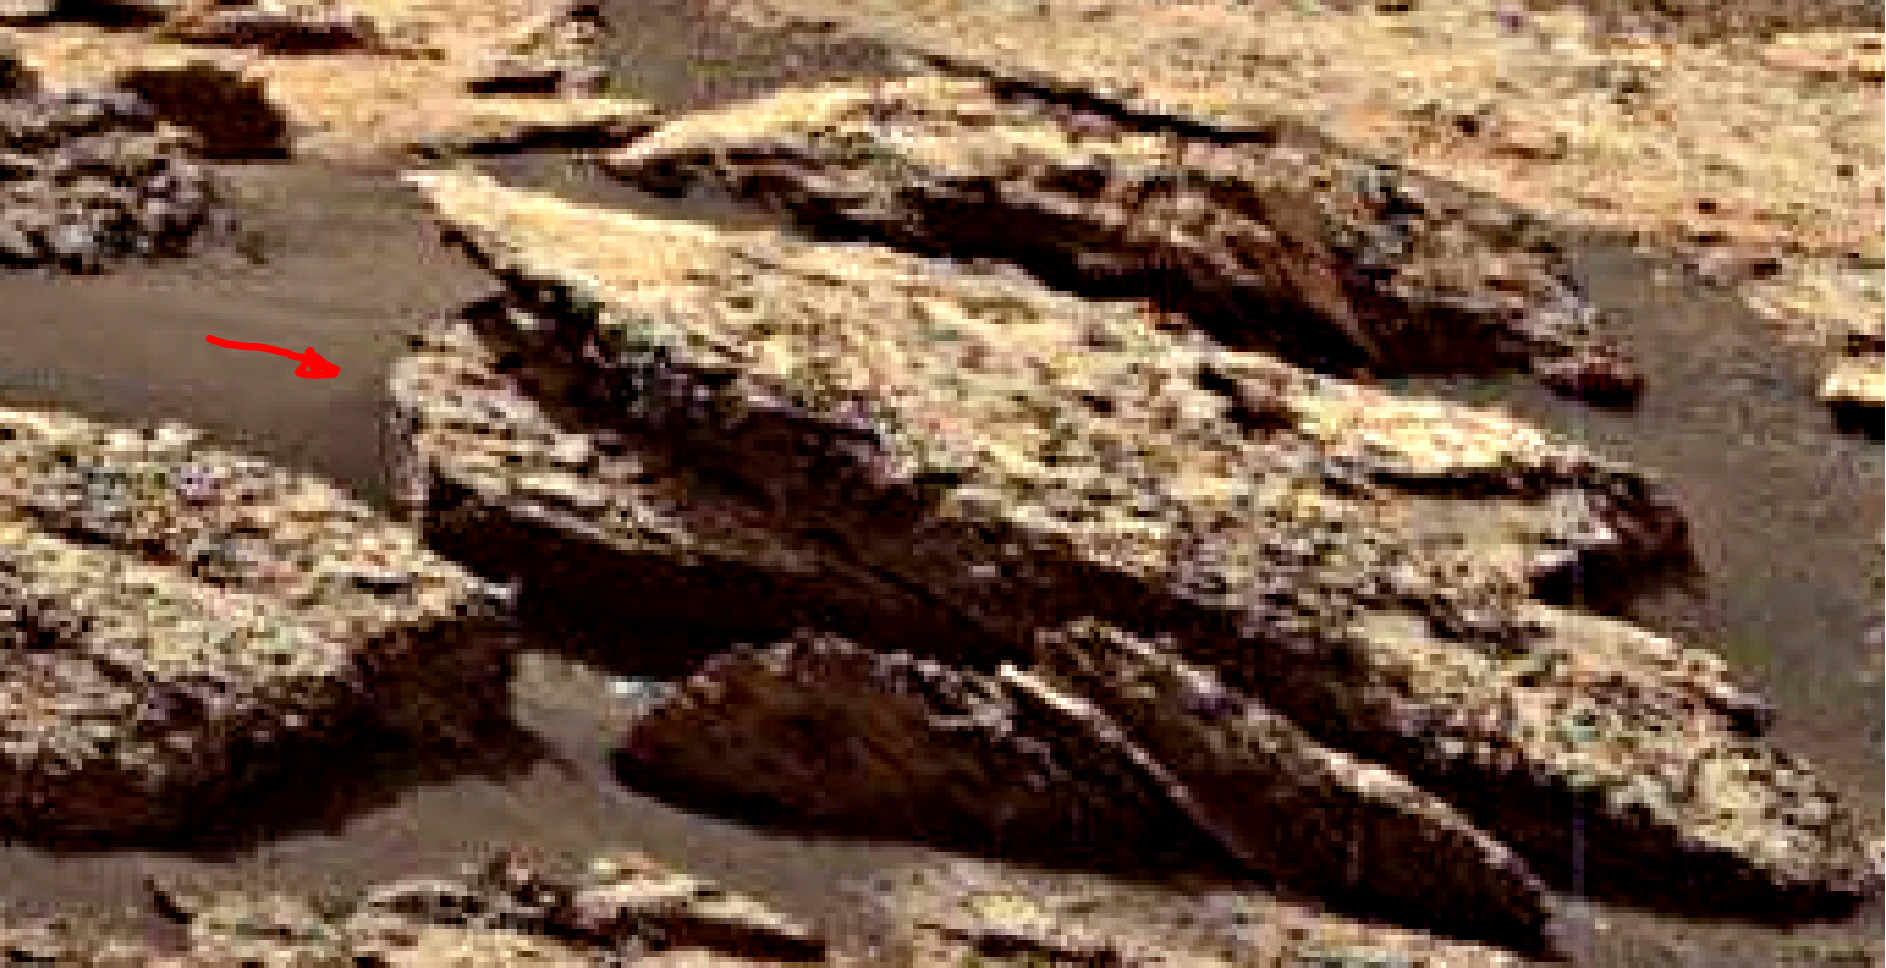 mars-sol-1485-anomaly-artifacts-1a-was-life-on-mars